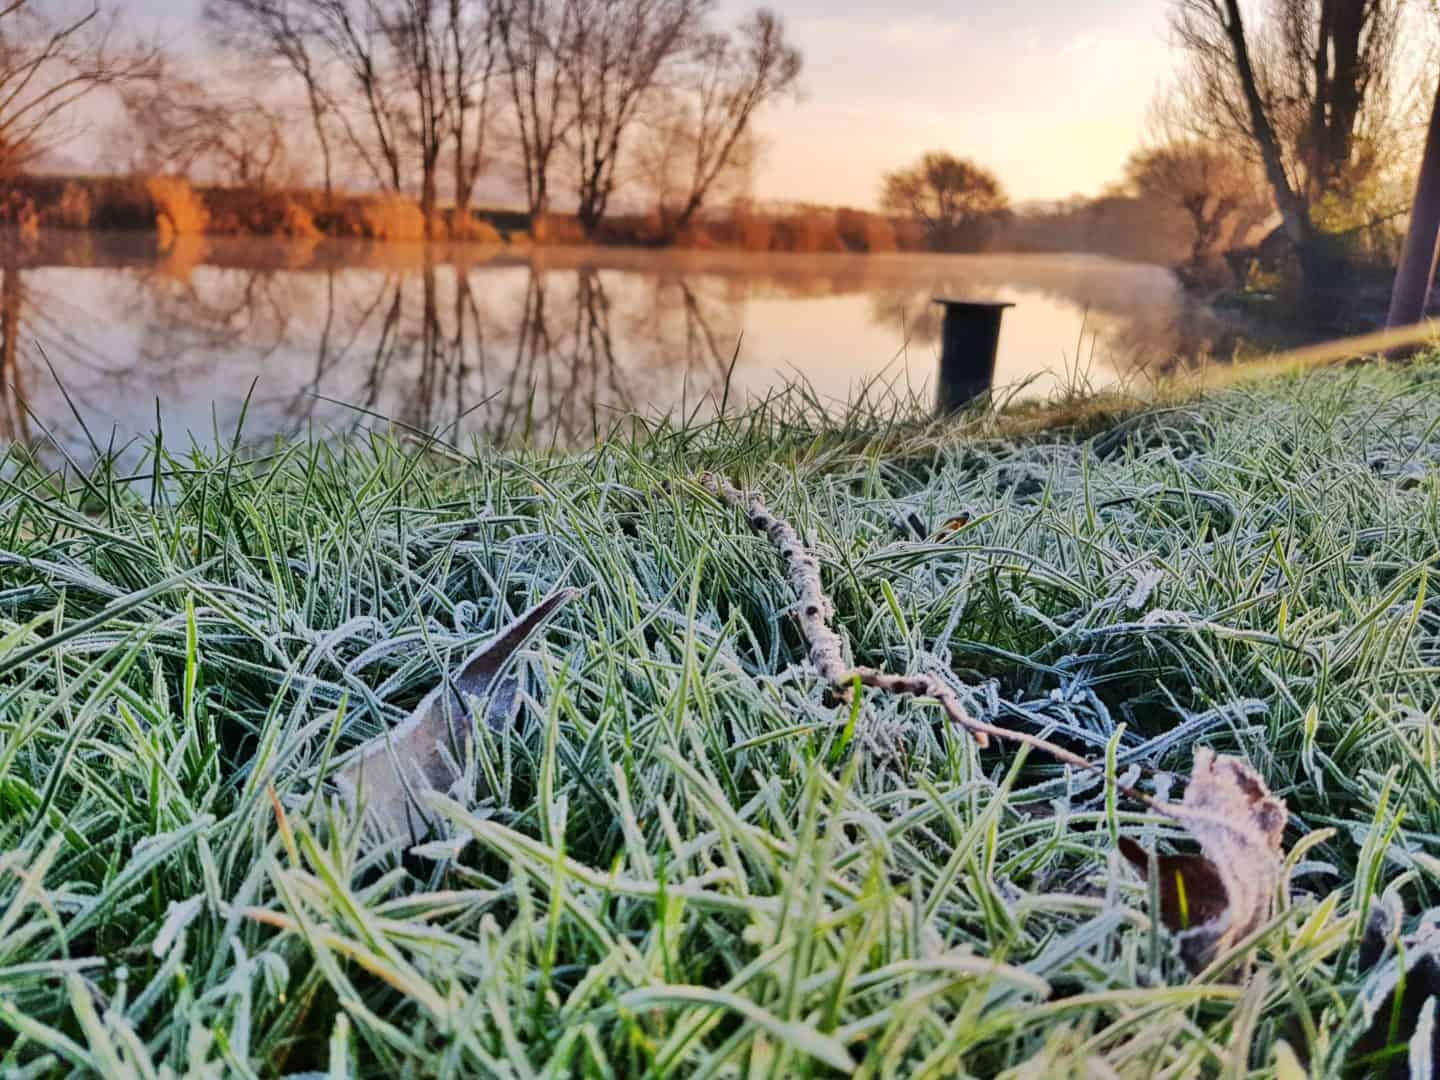 Eckington Bridge in Pershore, Worcestershire viewed from a distance across the river Avon with frosty grass in the foreground